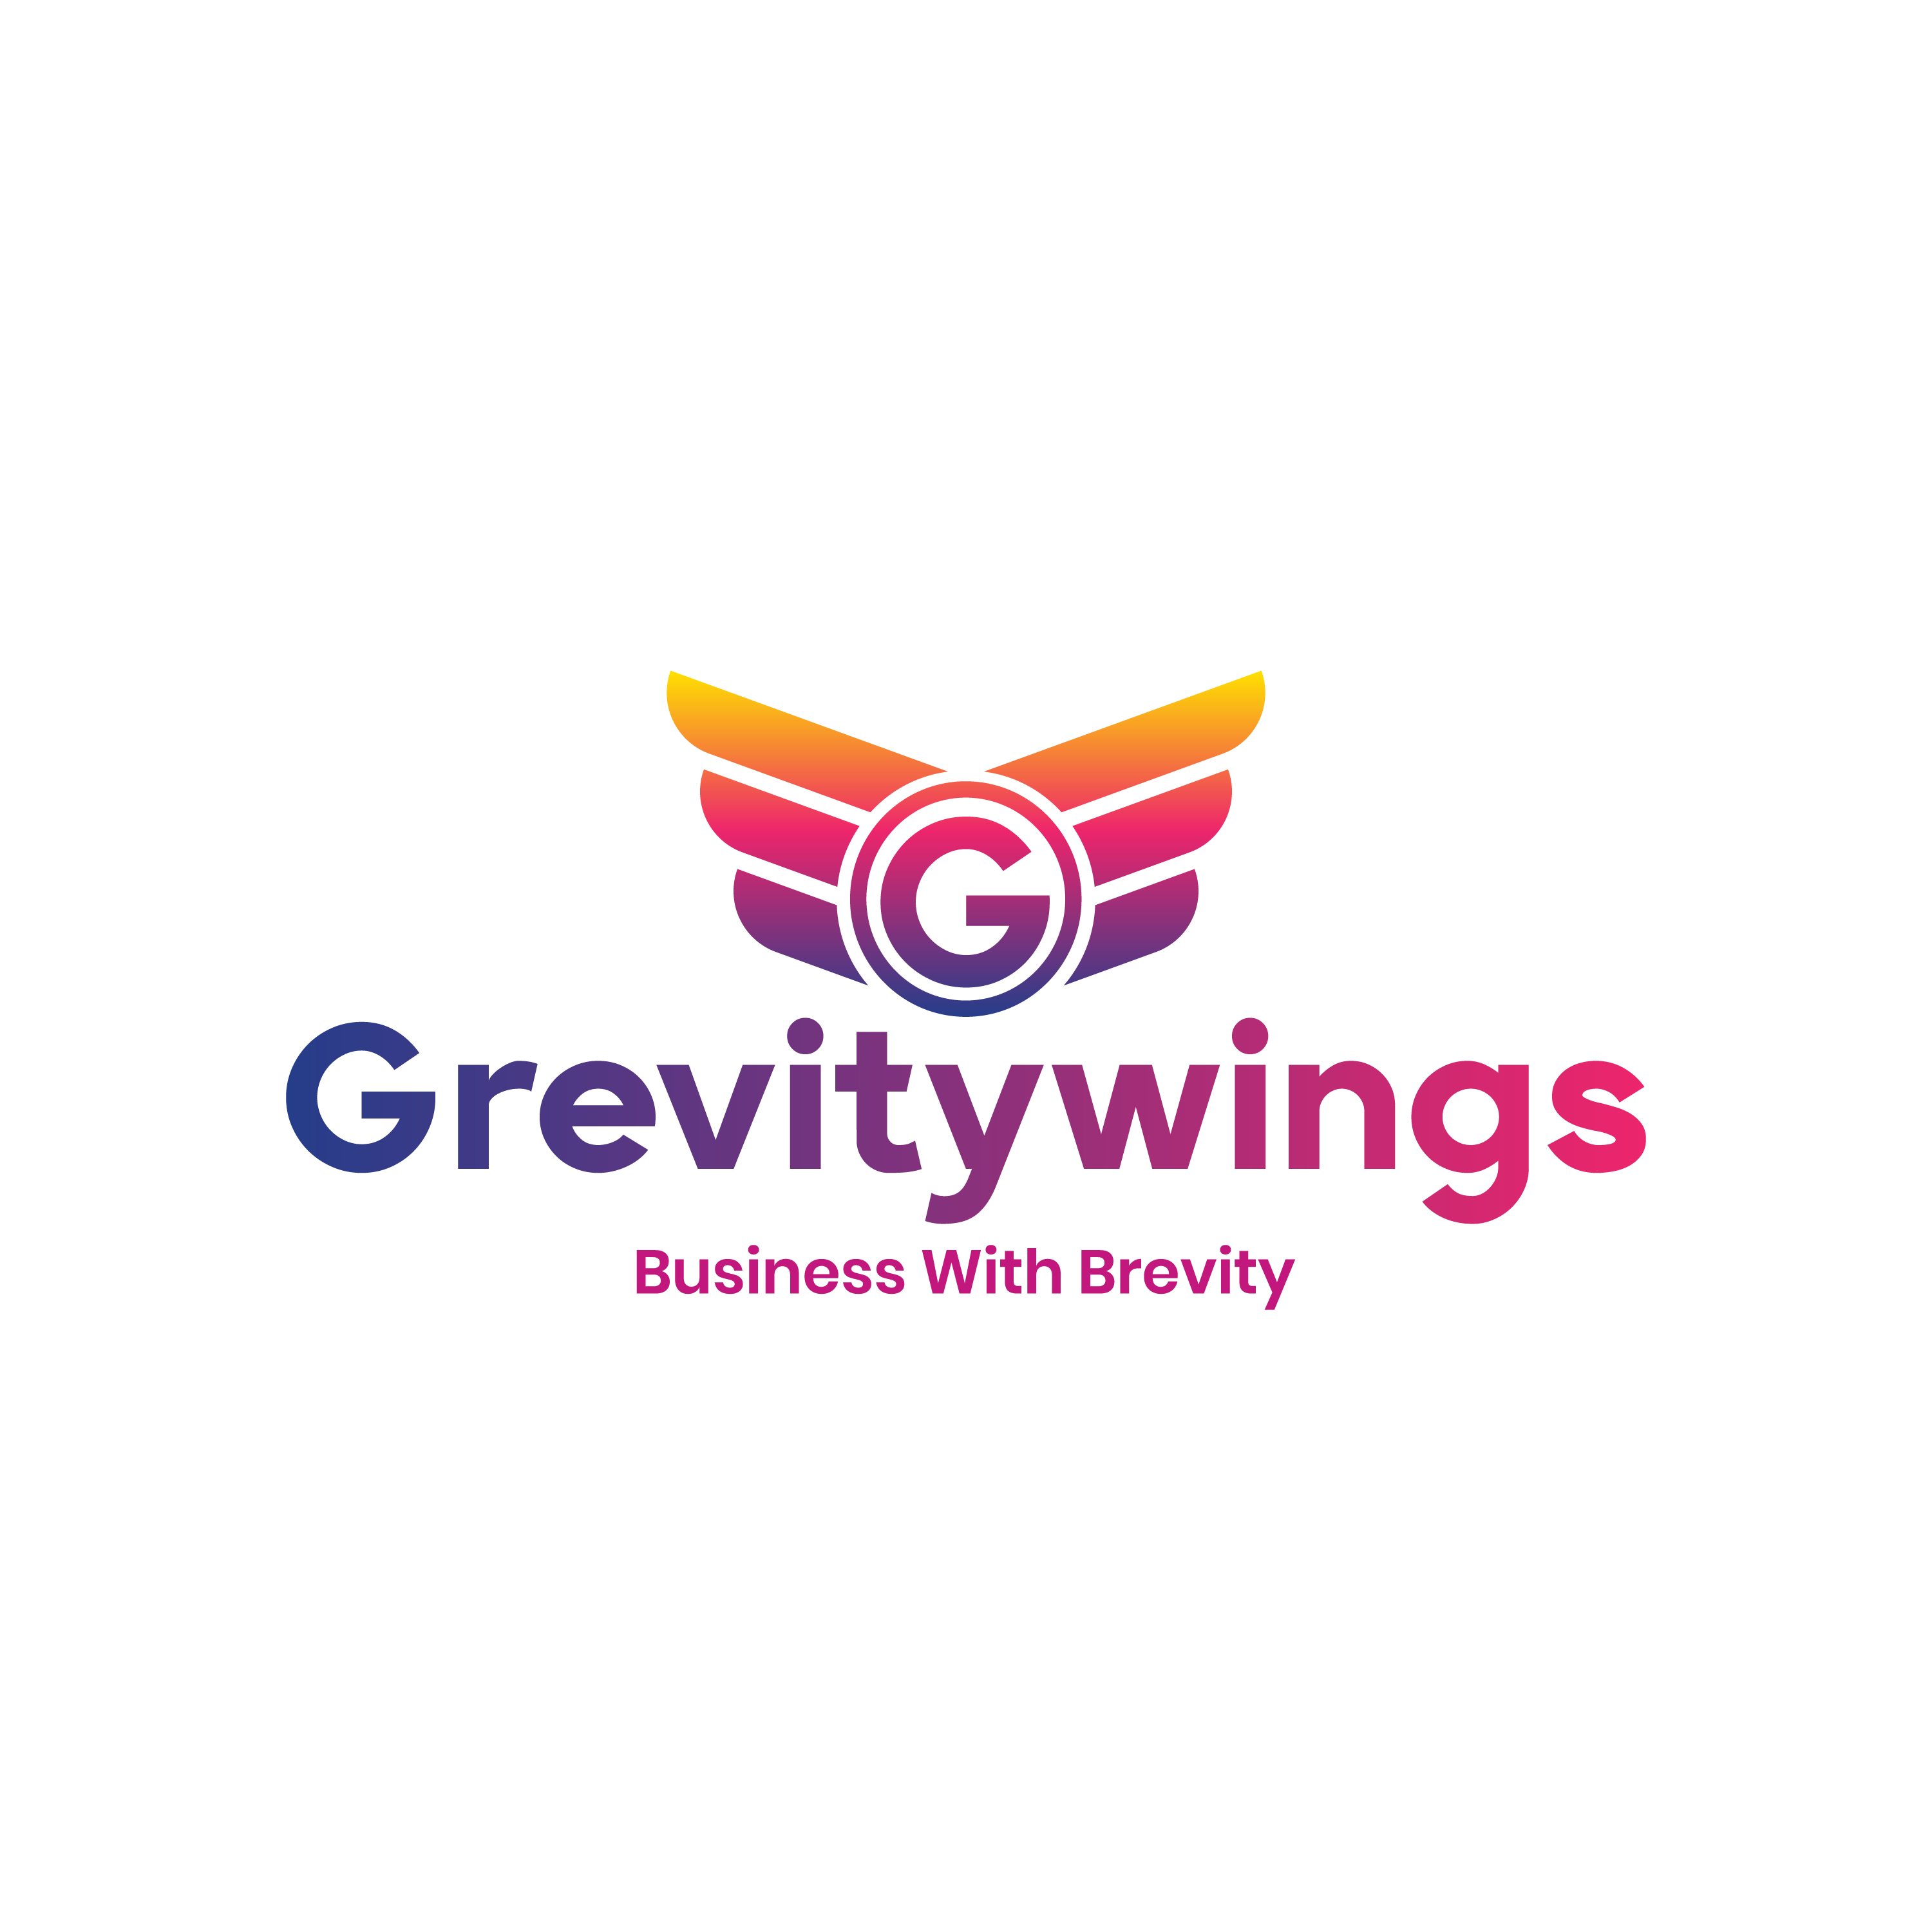 https://www.mncjobsindia.com/company/grevitywings-technologies-private-limited-1637860007